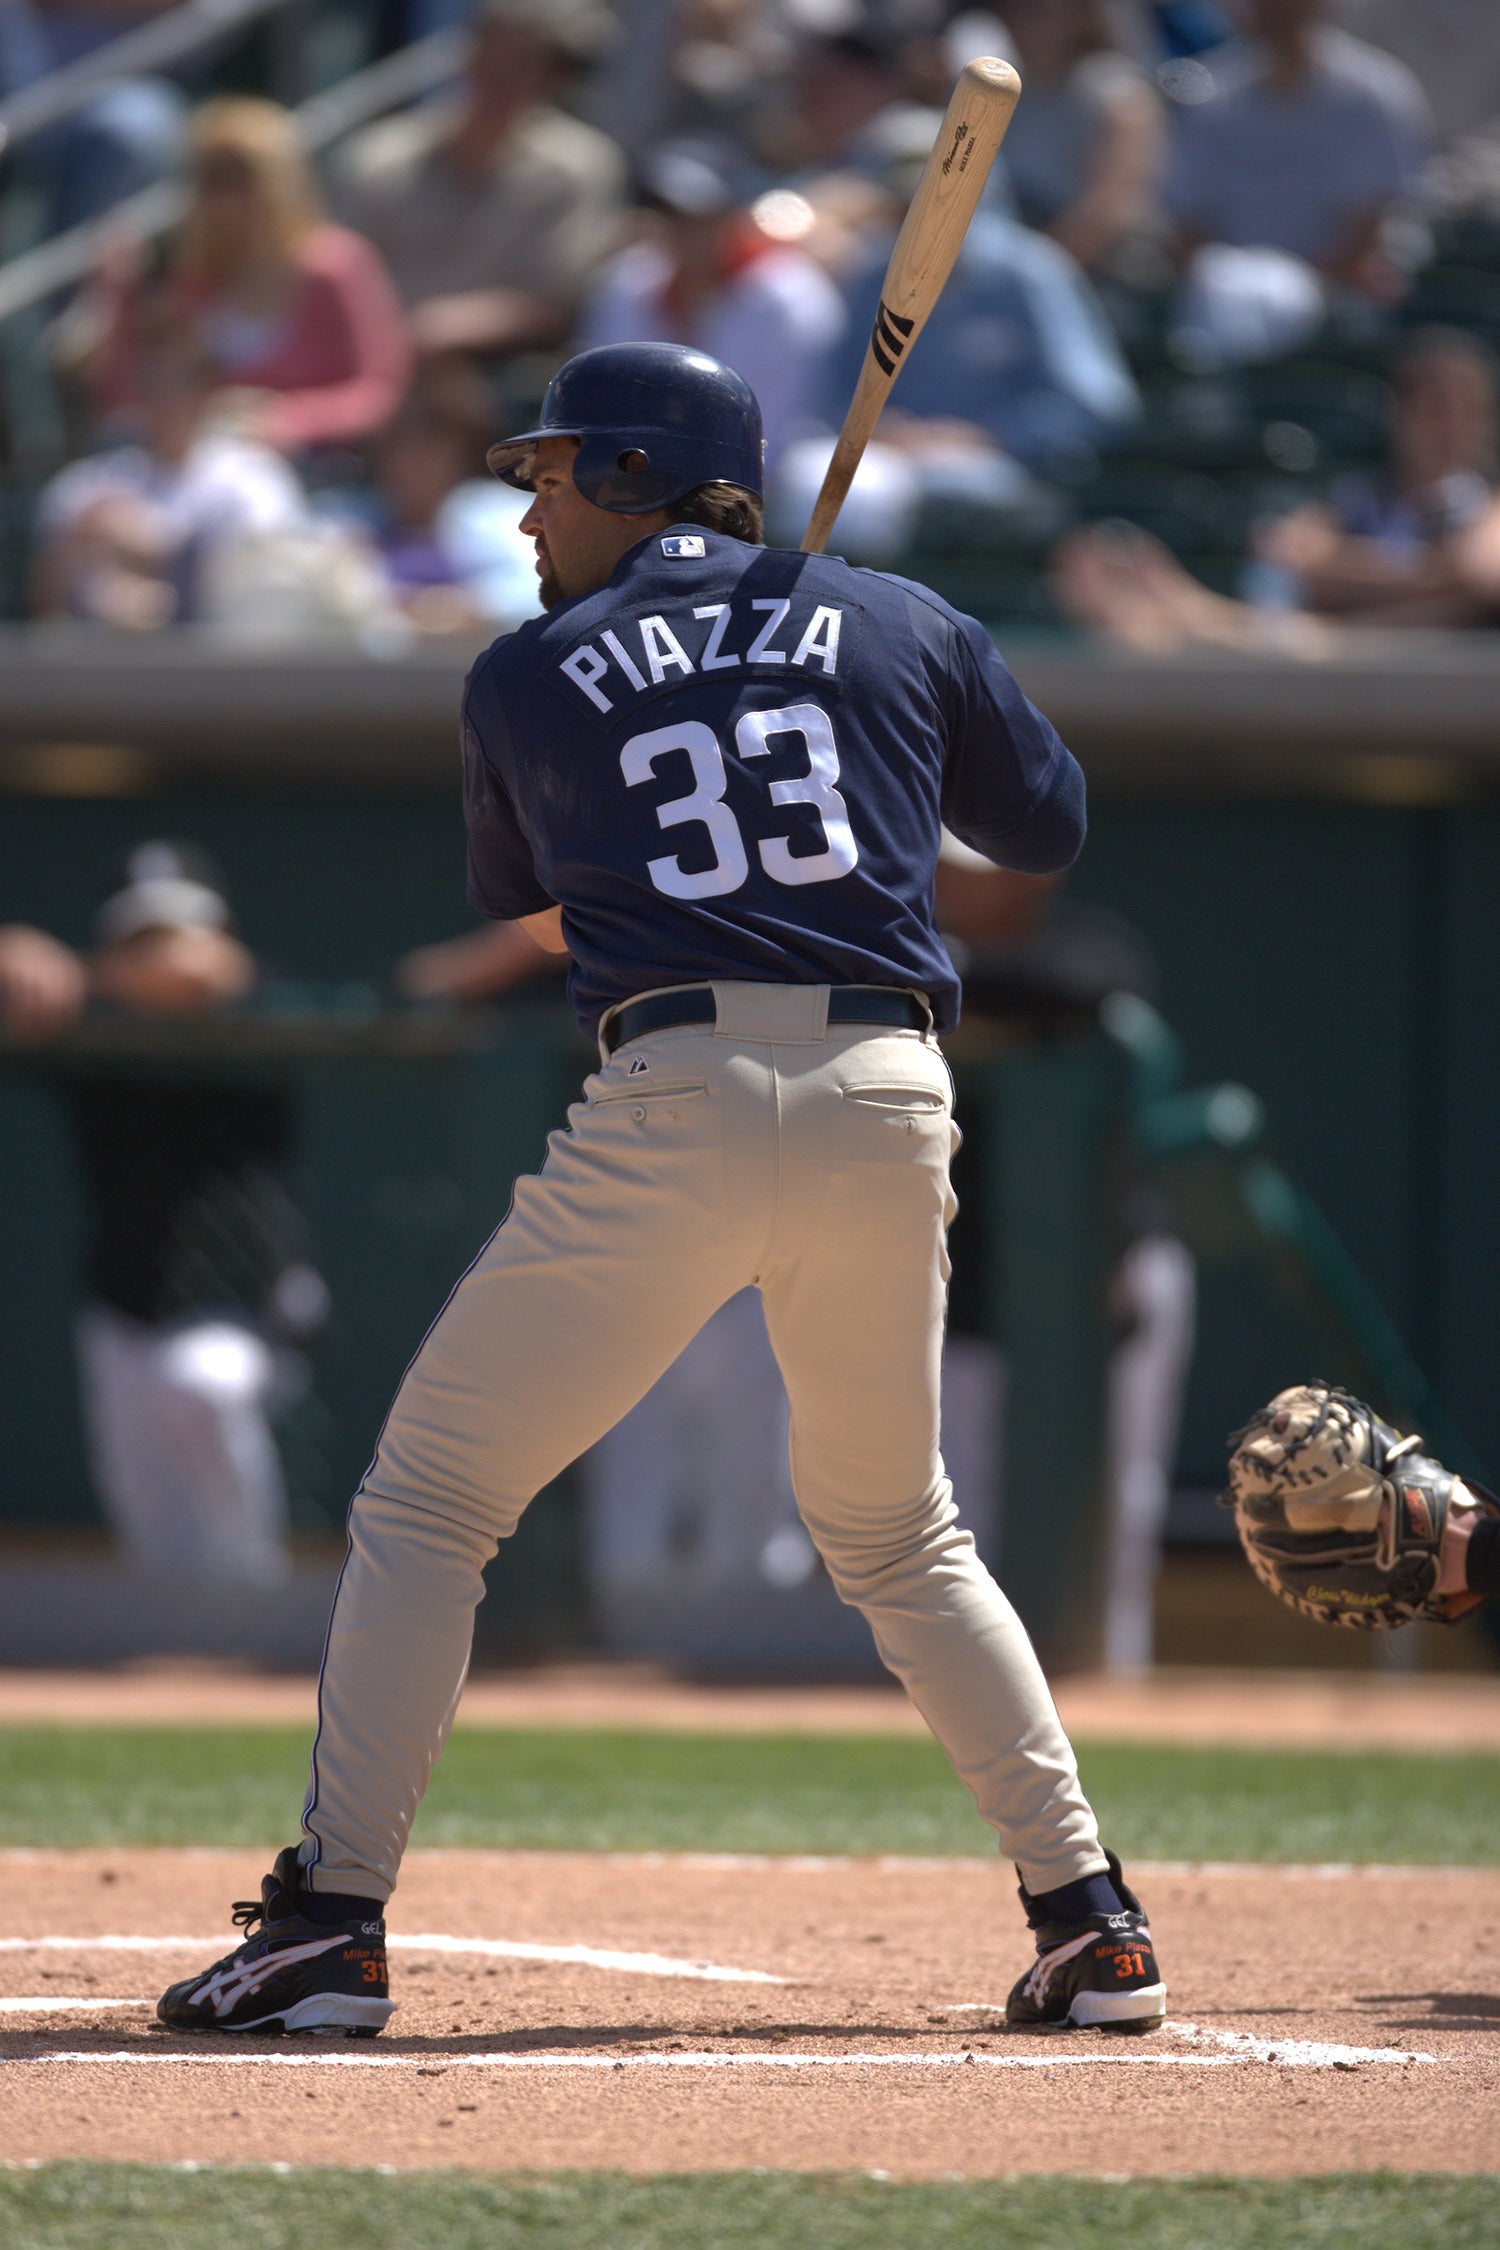 Who won the Mike Piazza trade?